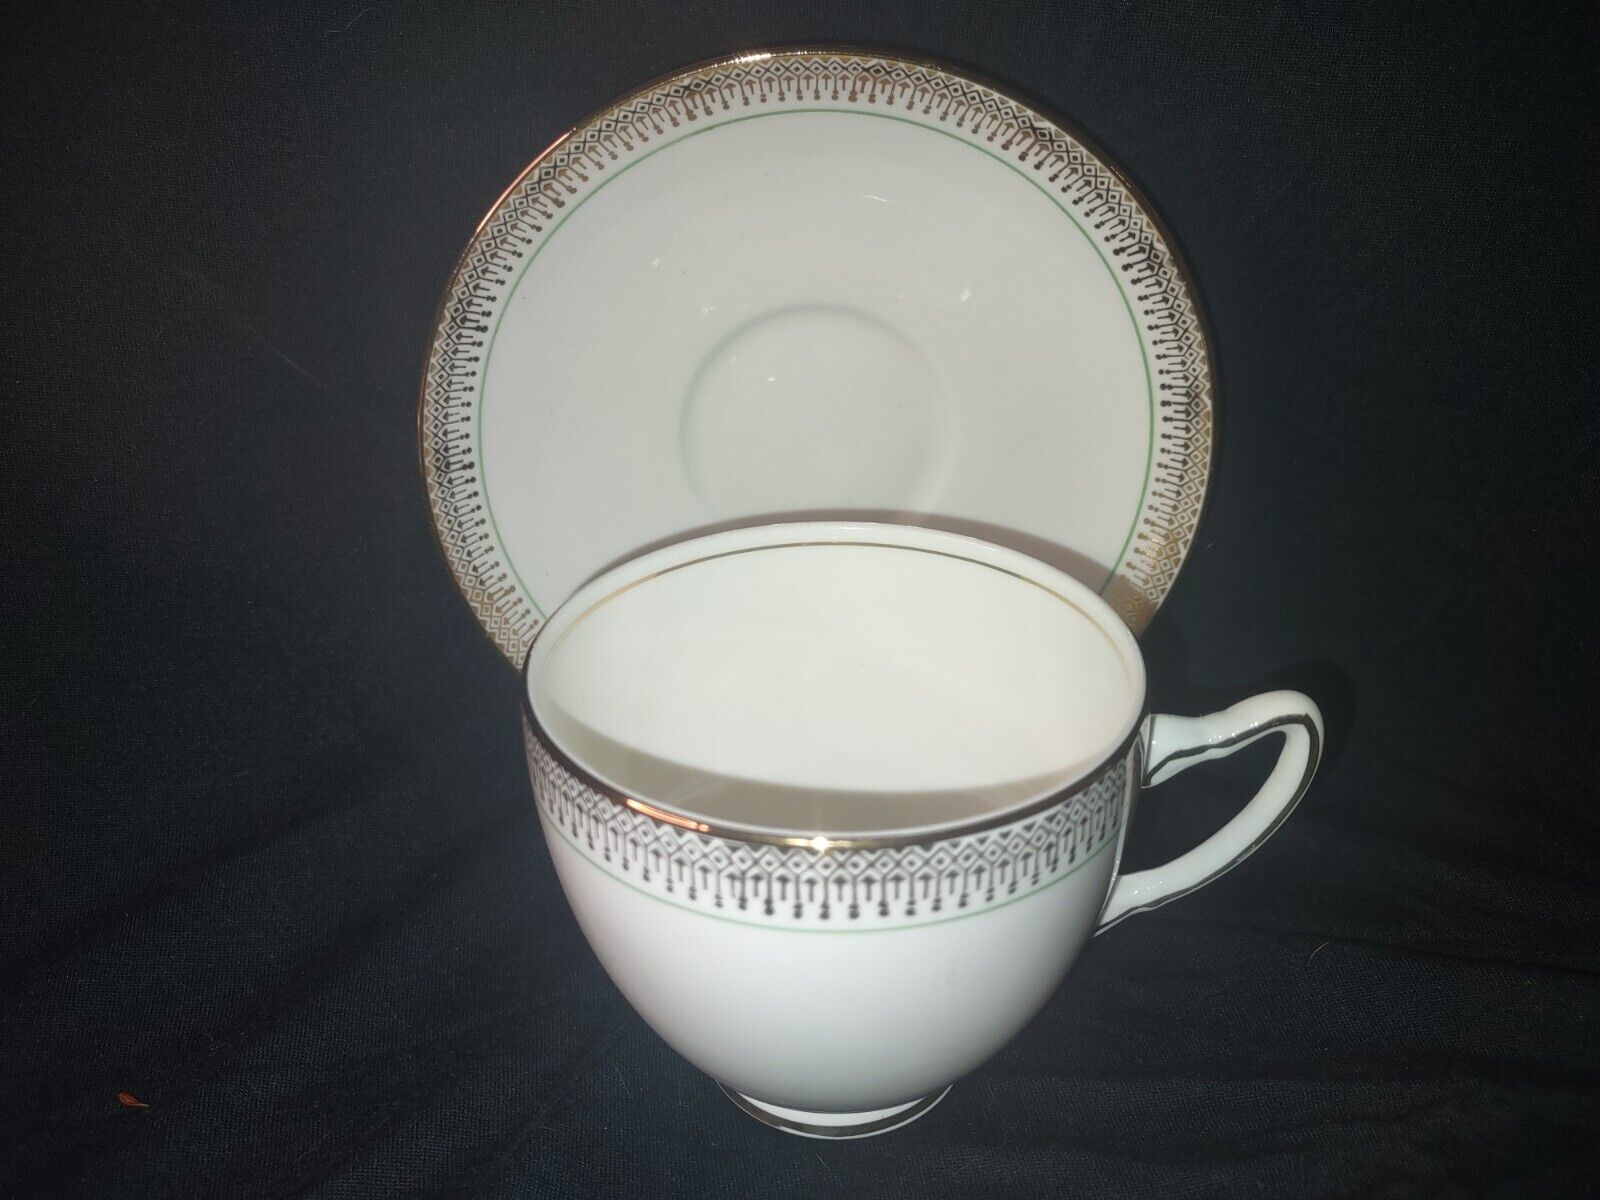 Adderly Vintage rare tea cup saucer white with gold trim green line 838958